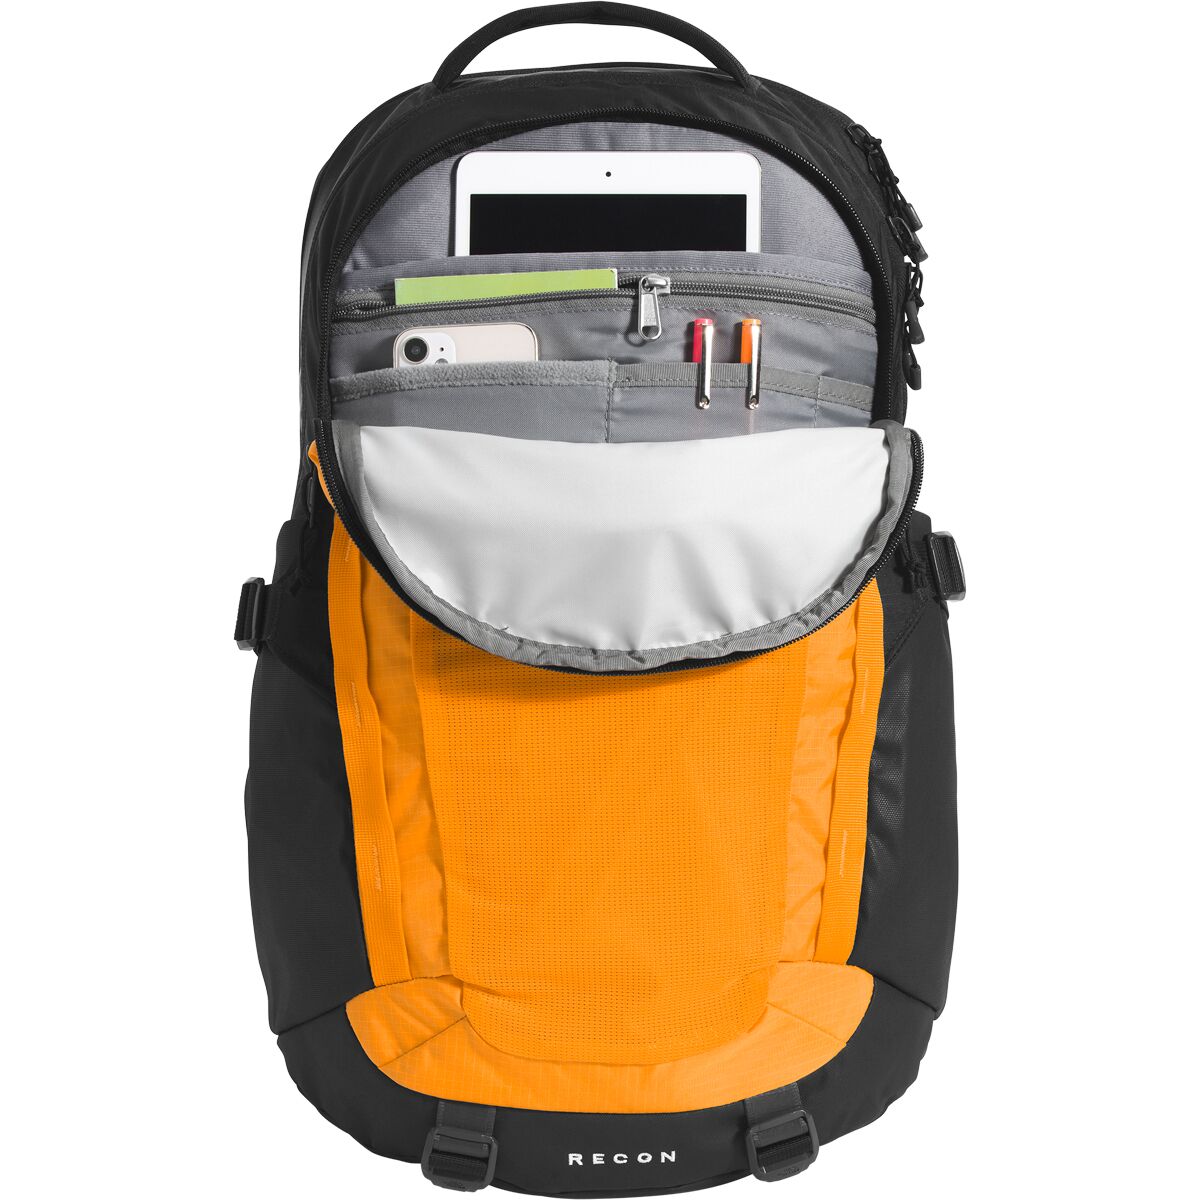 The North Face Recon 30L Backpack - Accessories